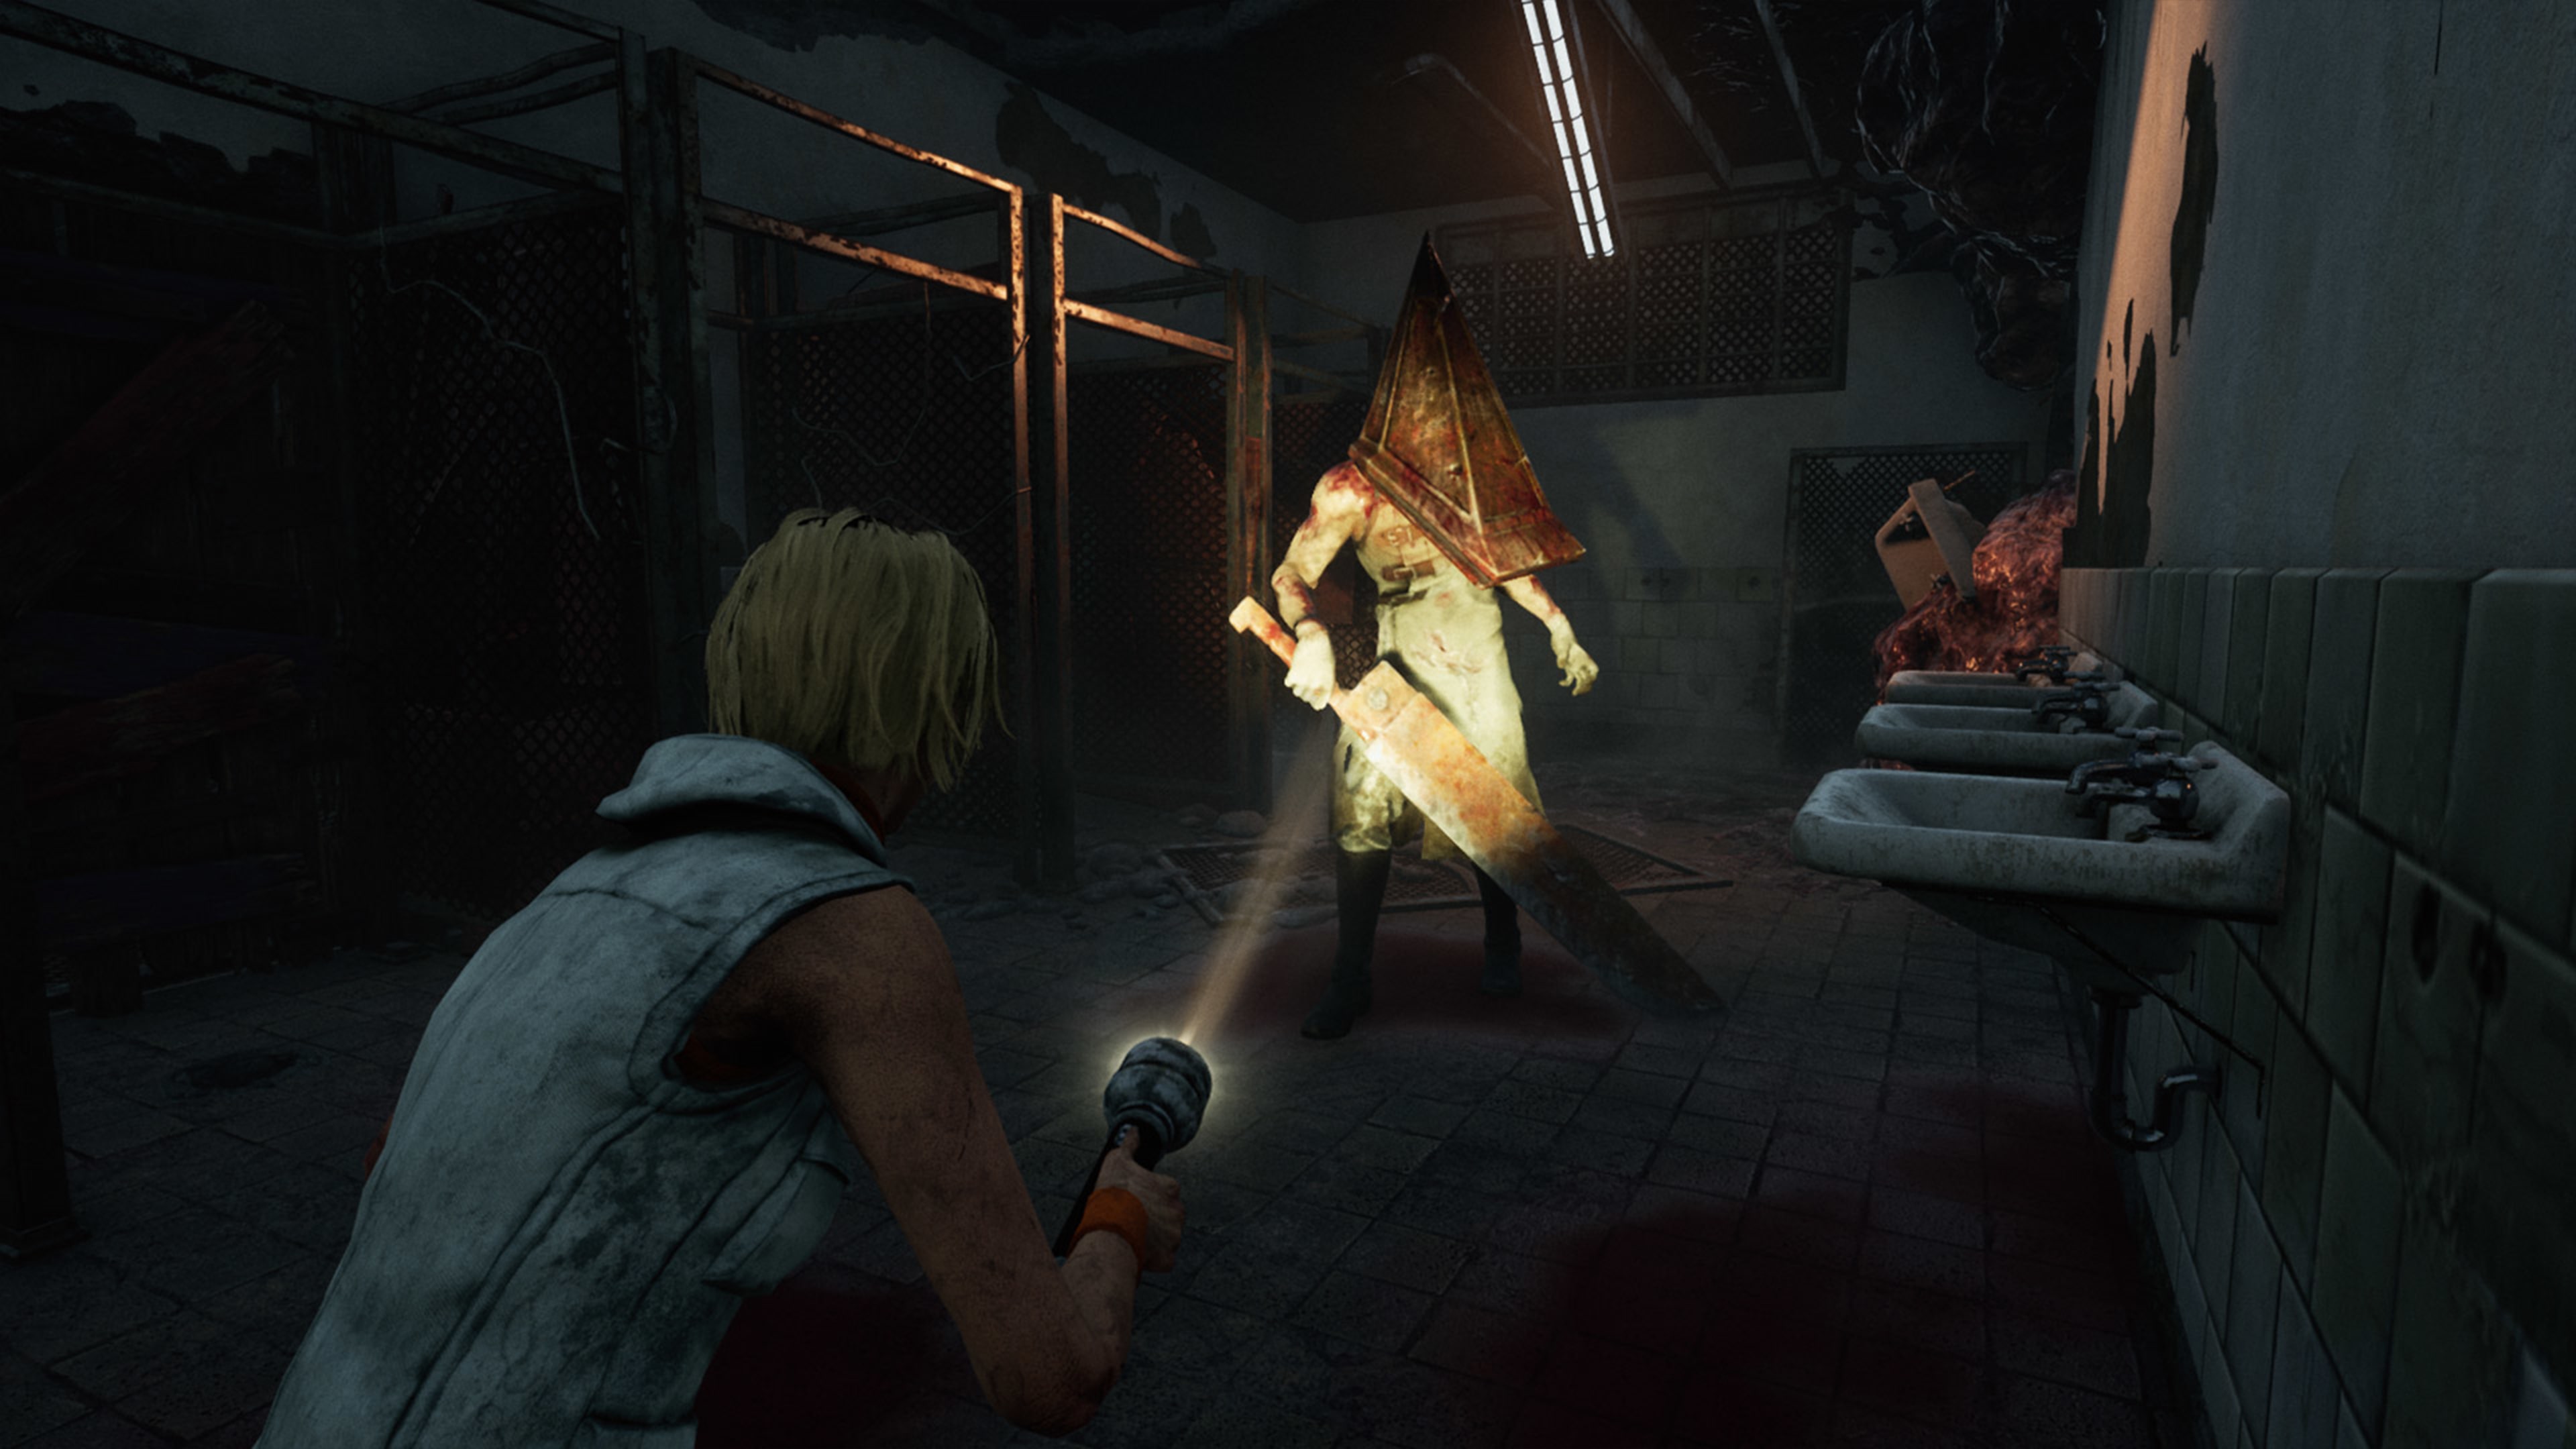 silent hill for playstation 4